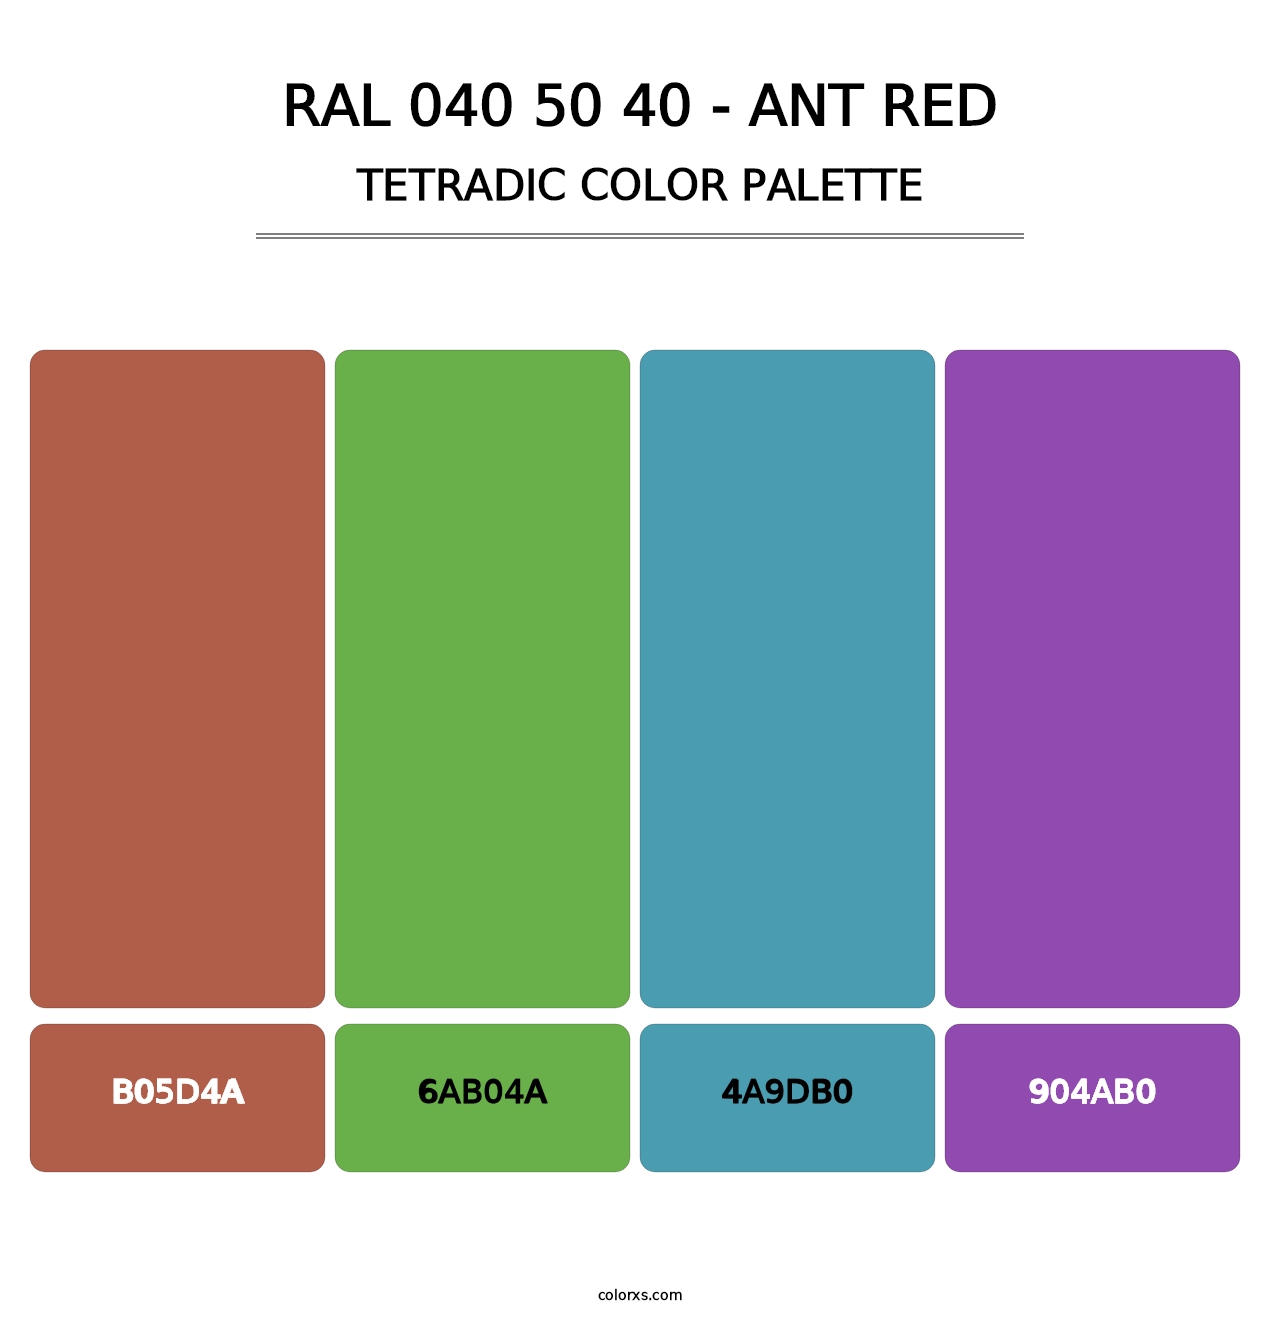 RAL 040 50 40 - Ant Red - Tetradic Color Palette